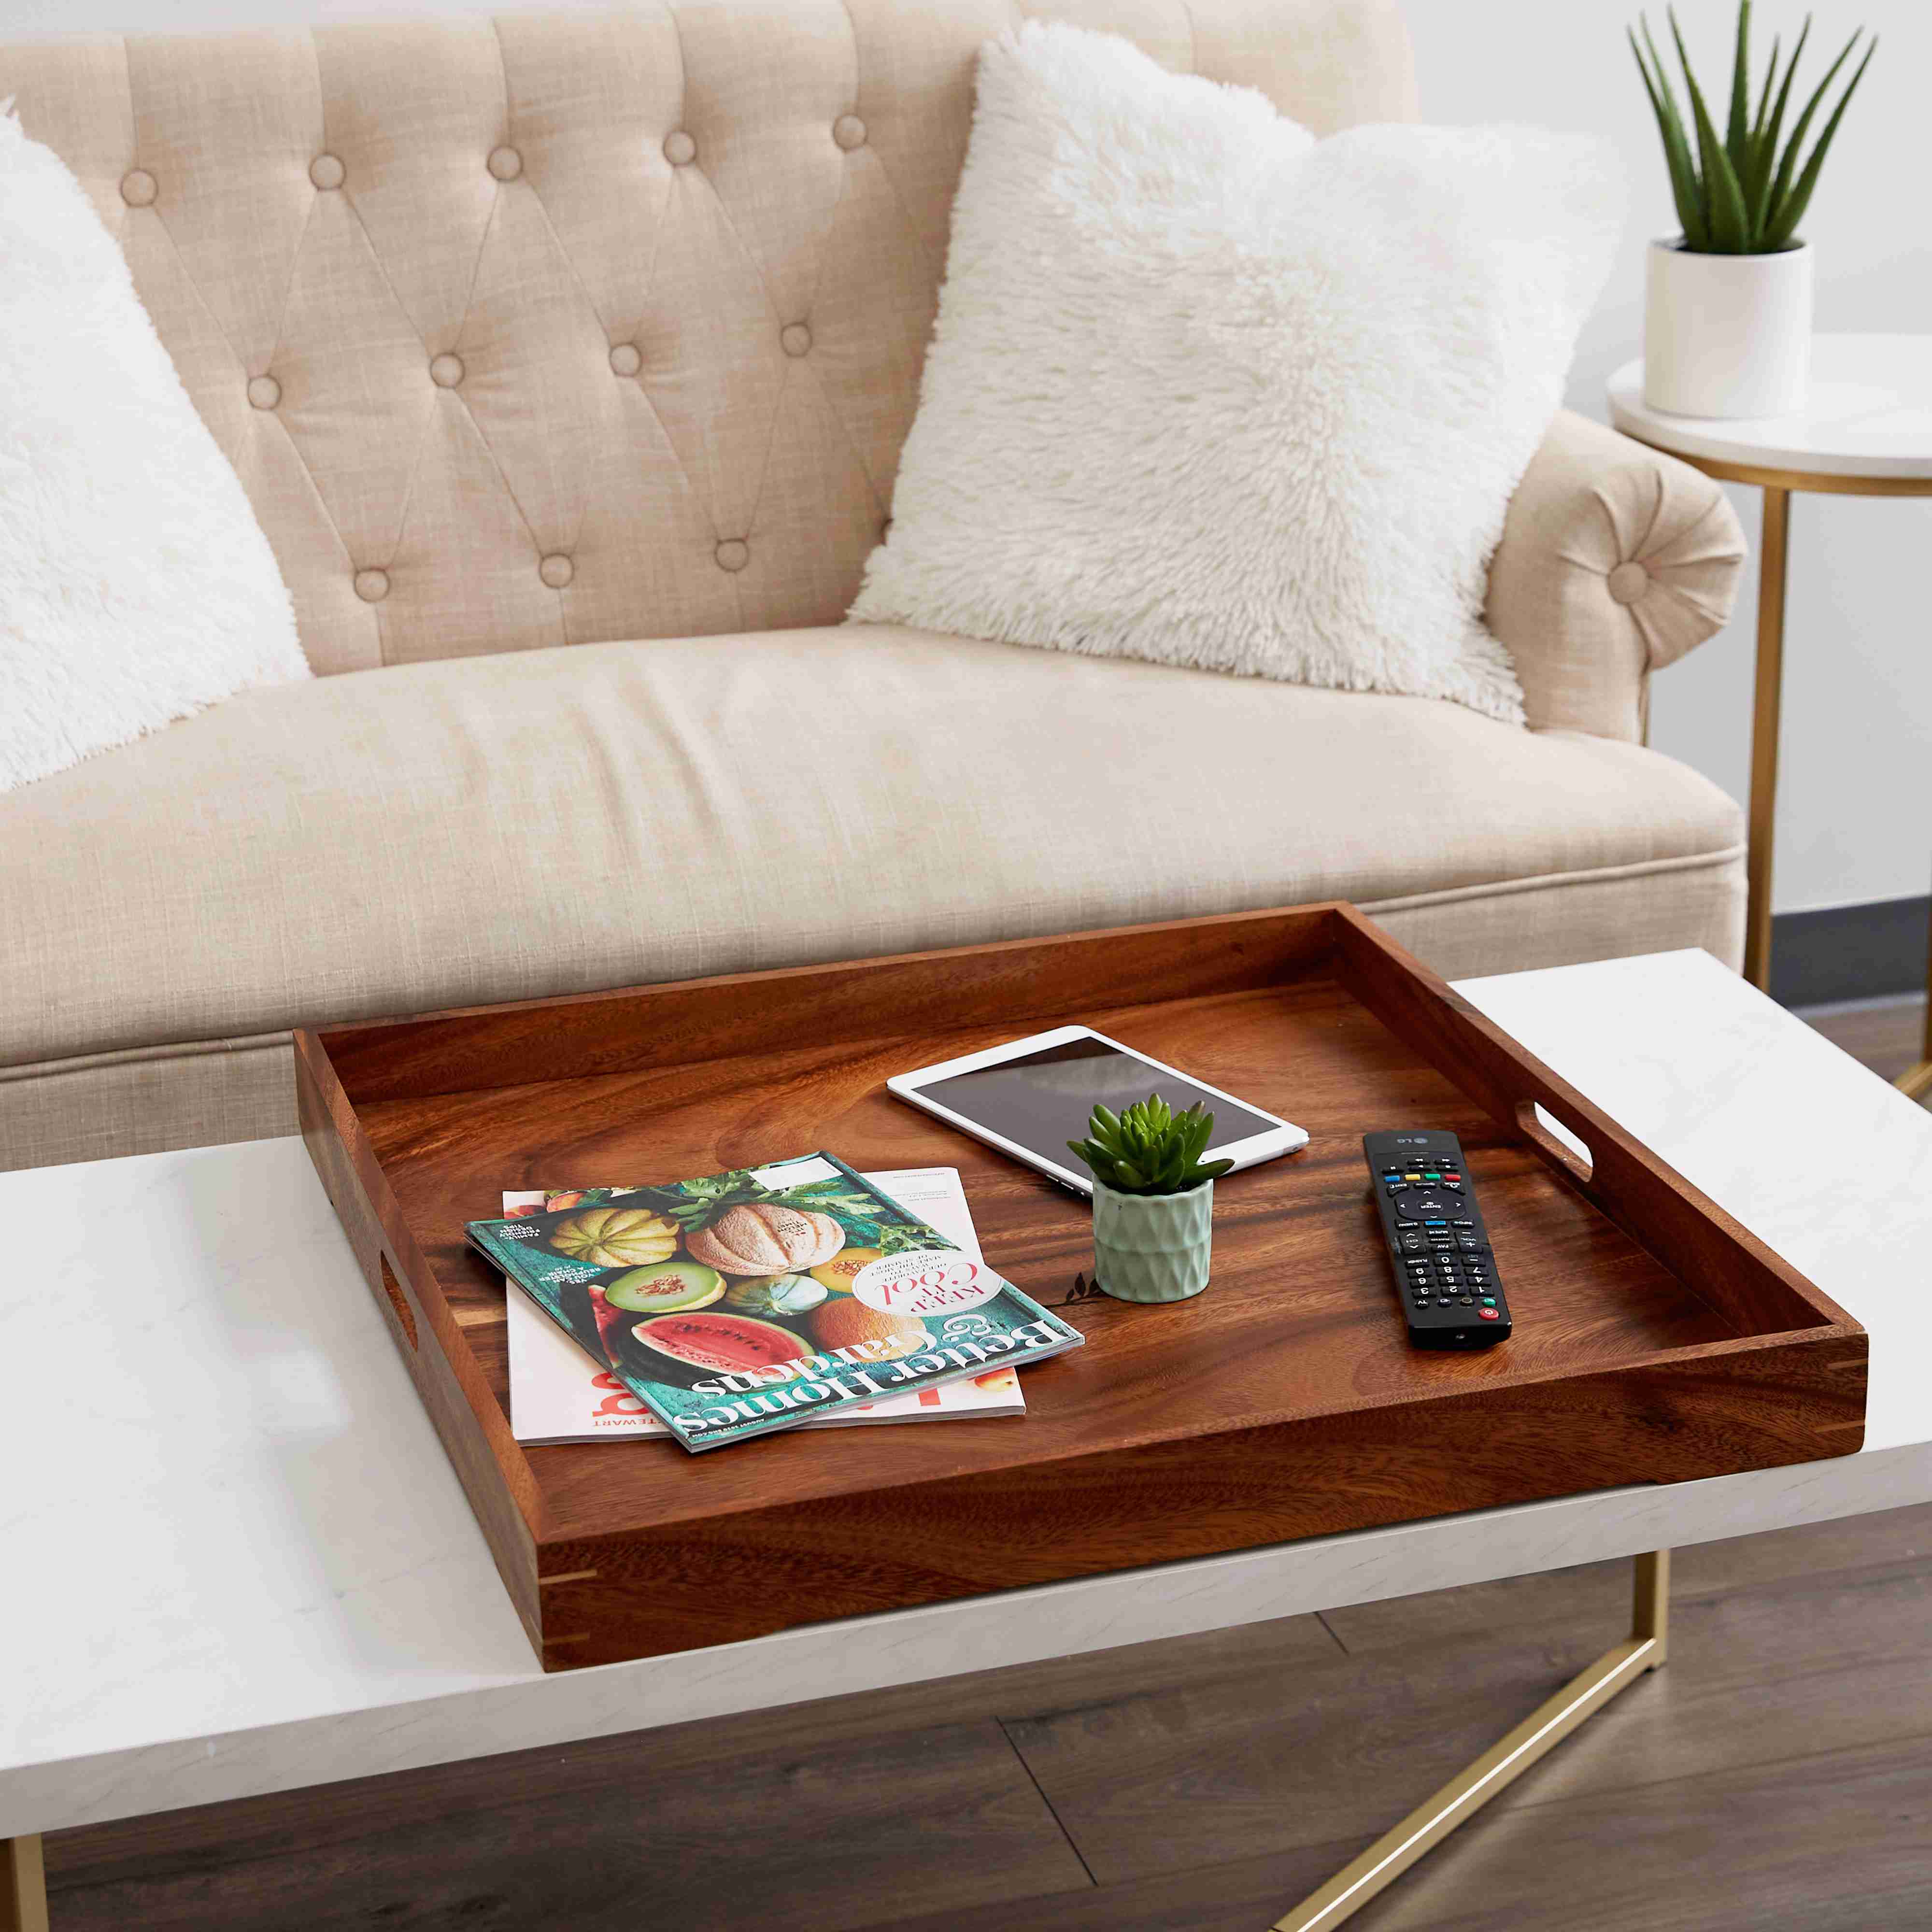 Ottoman-Tray with cash back rebate